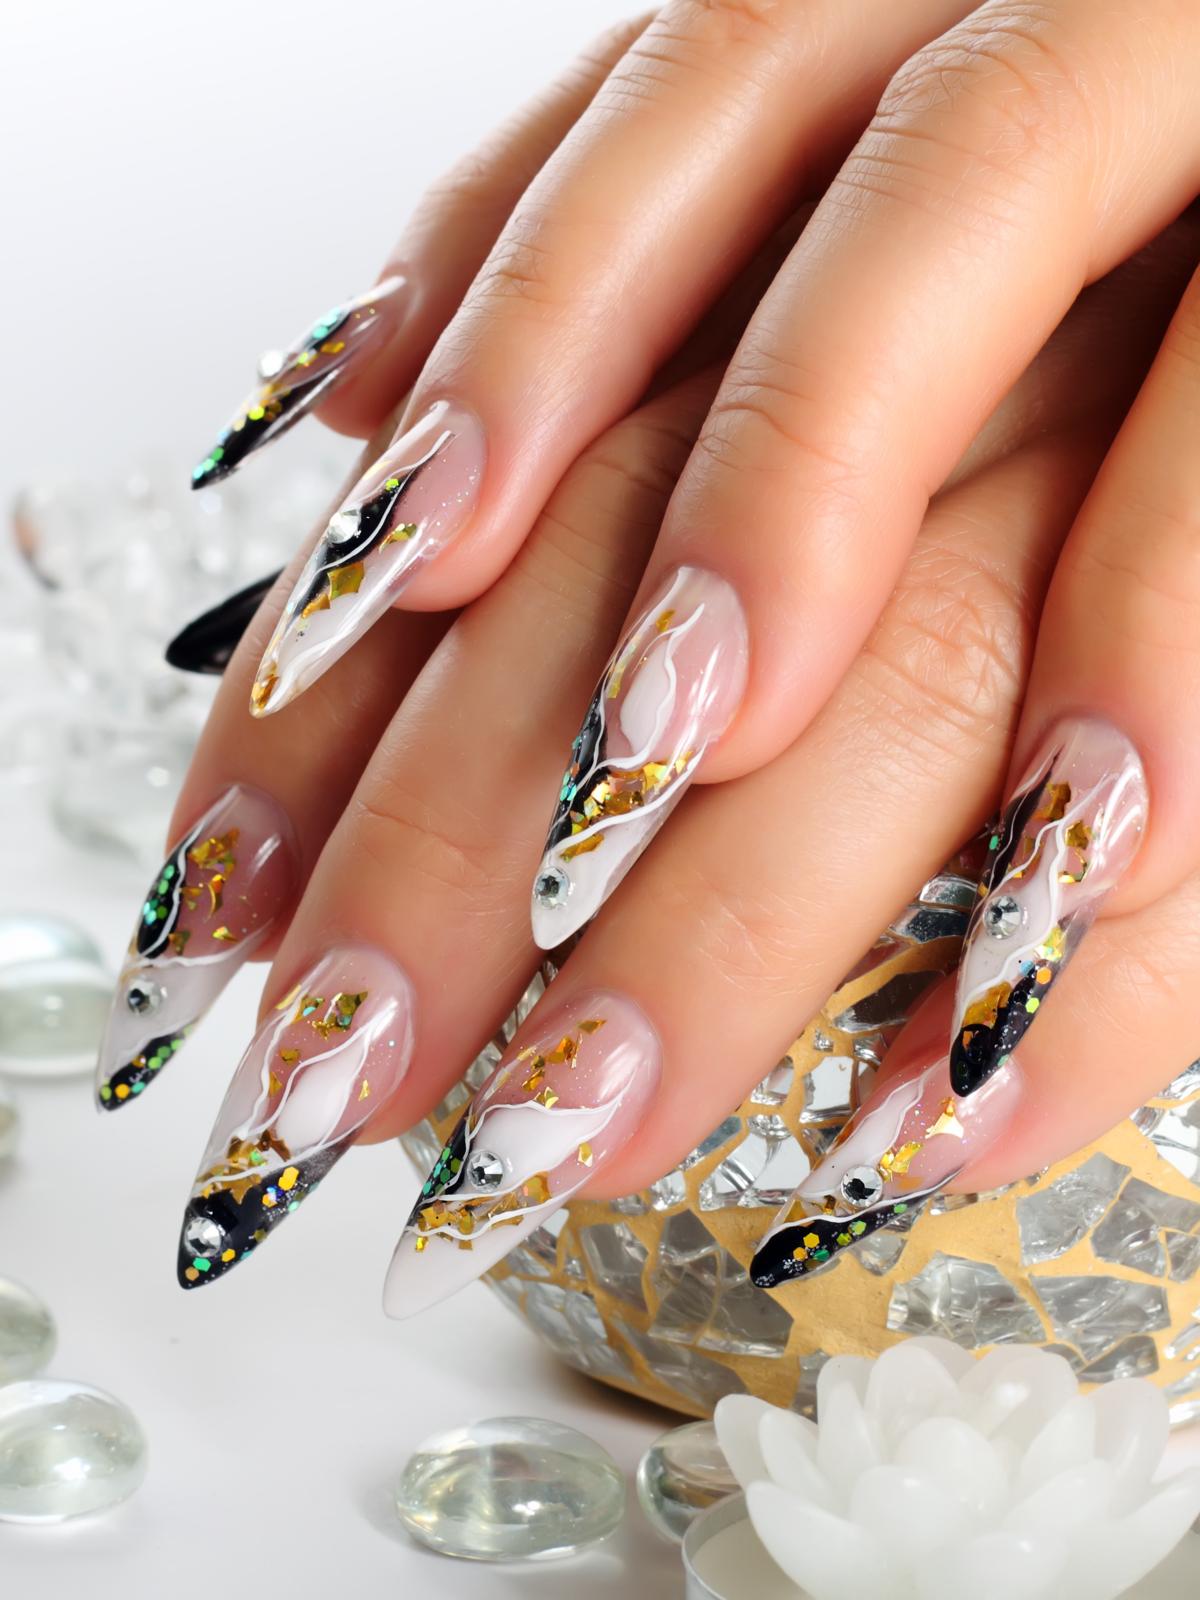 Ridiculously Useful Tips on Taking Care of Acrylic Nails - Nail Art Mag